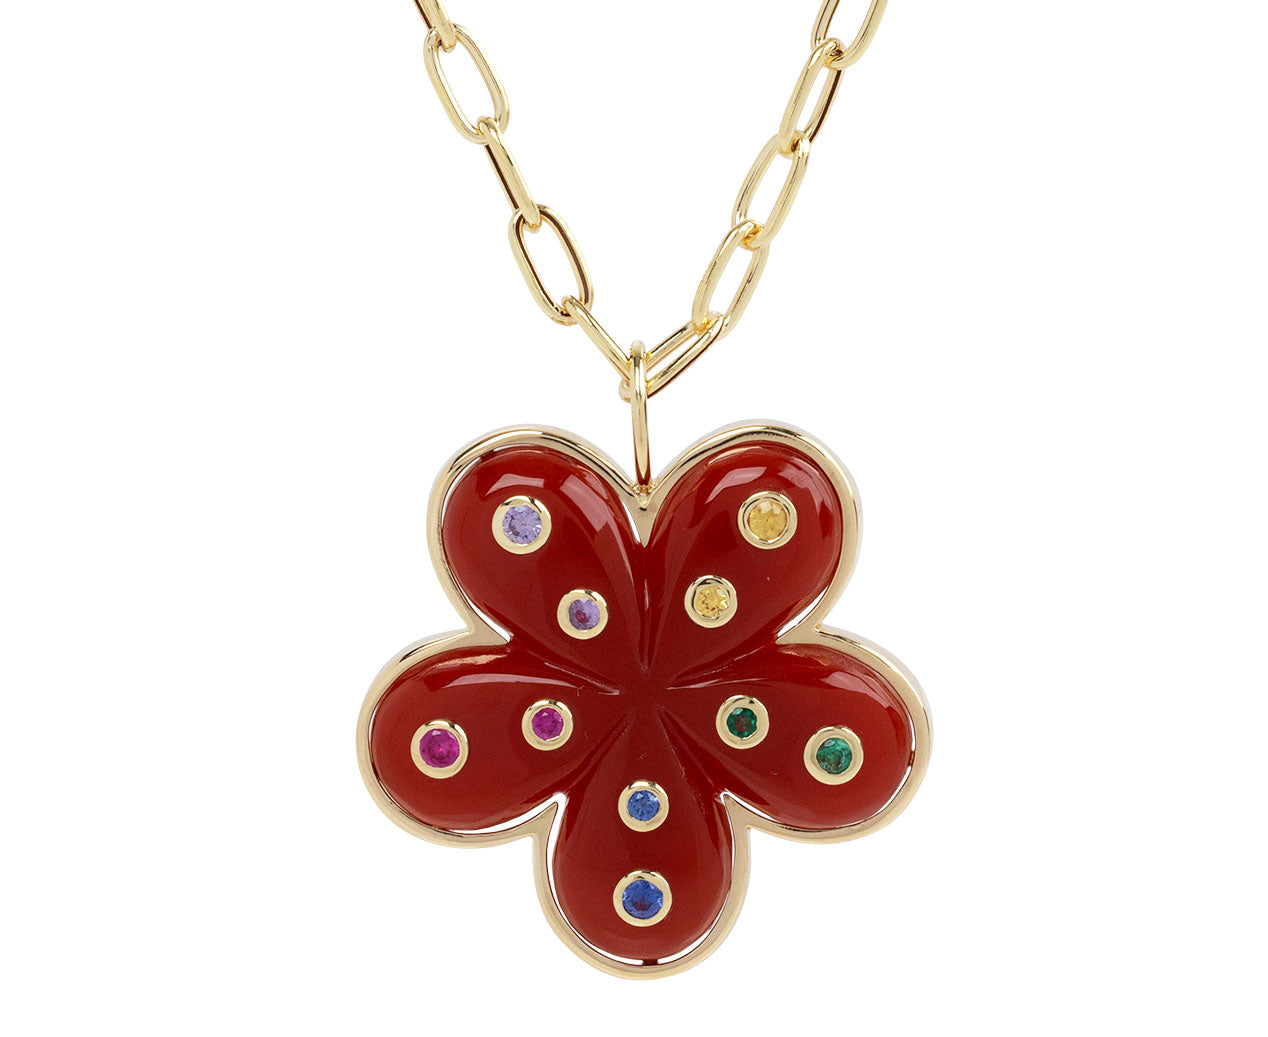 Floral pendant with gold petals and vibrant beads perched in the